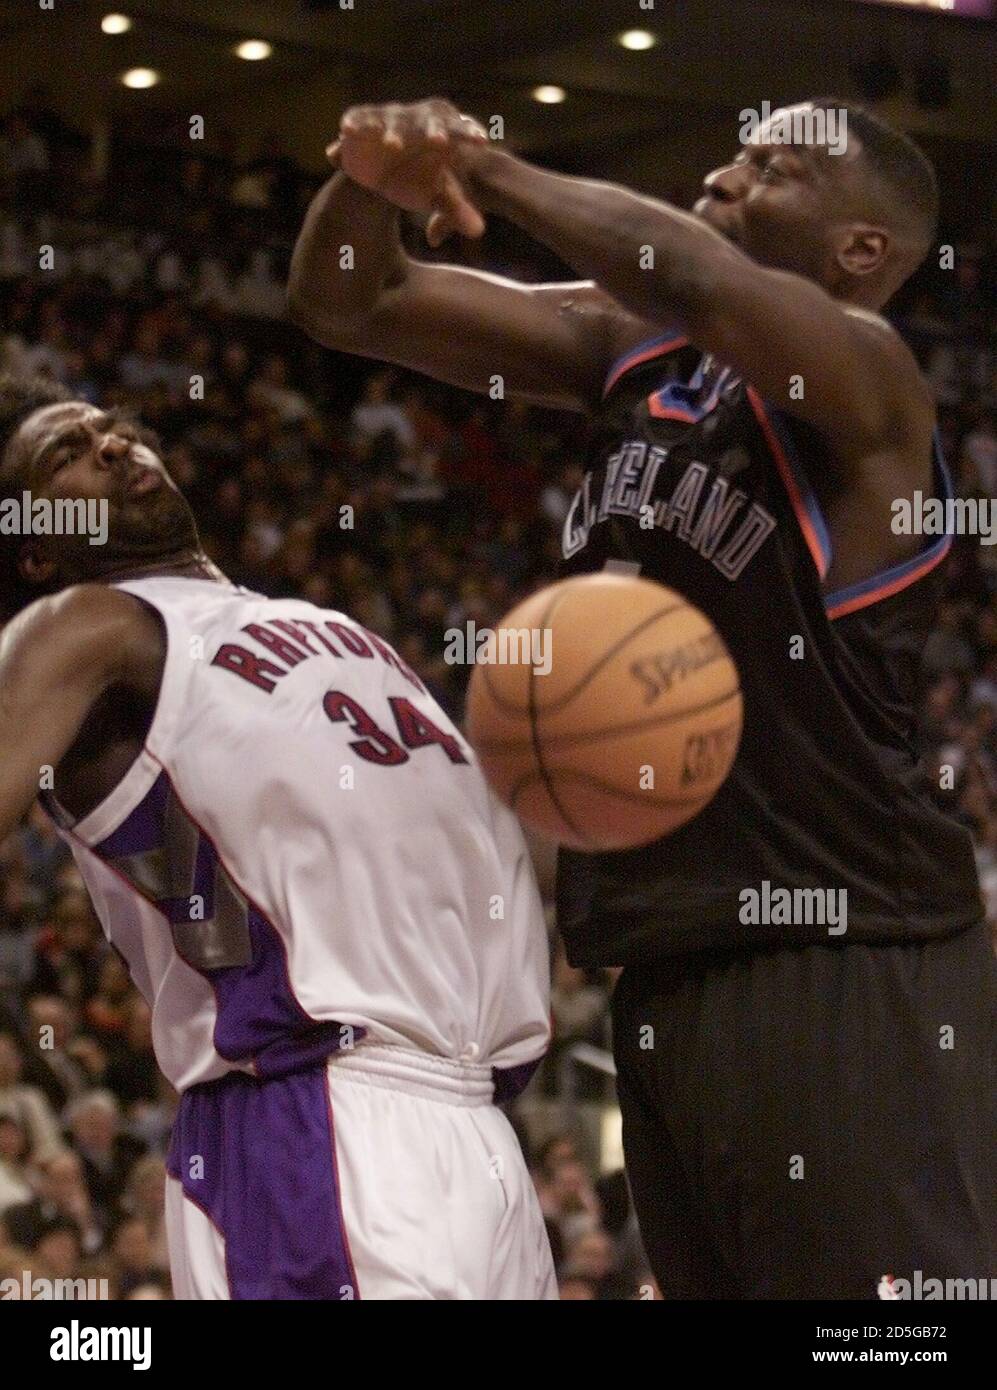 Toronto Raptors Charles Oakley (L) reacts after bumping into Cleveland  Cavaliers Shawn Kemp during second half NBA action december 7. Kemp lost  control of the ball after hitting Oakley. The Raptors defeated